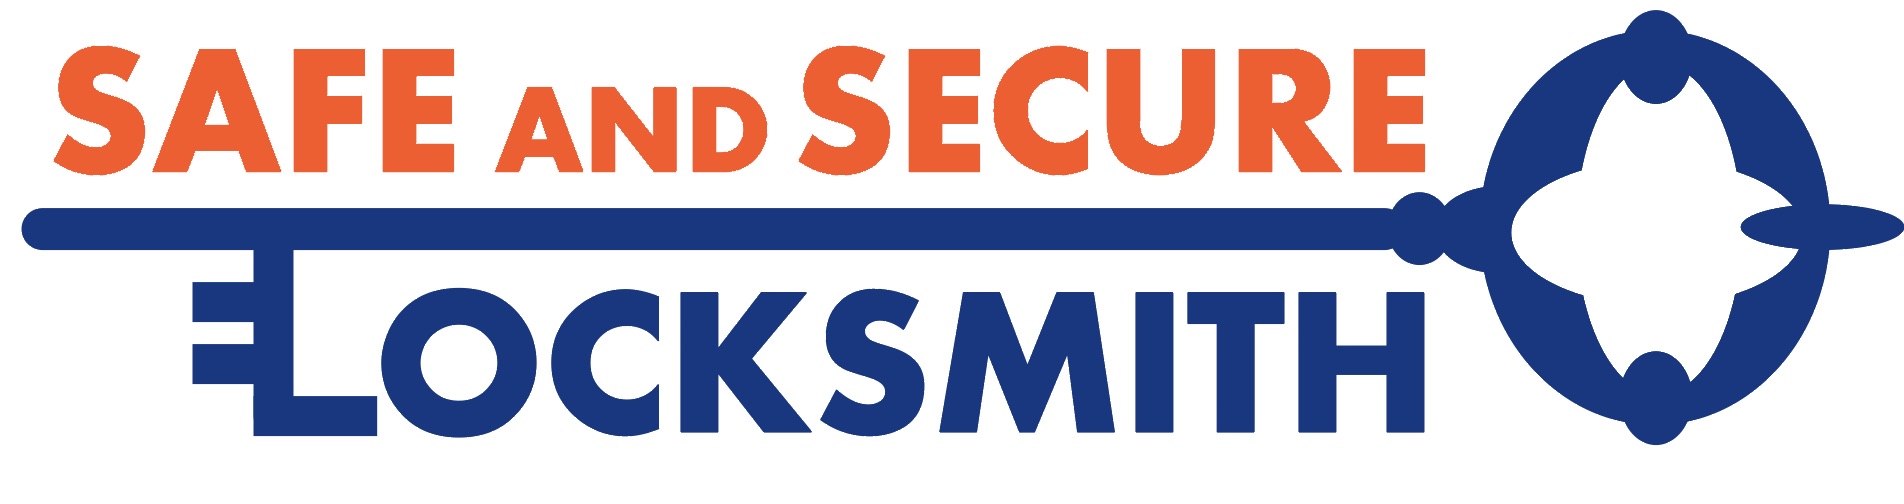 Safe and Secure Locksmith